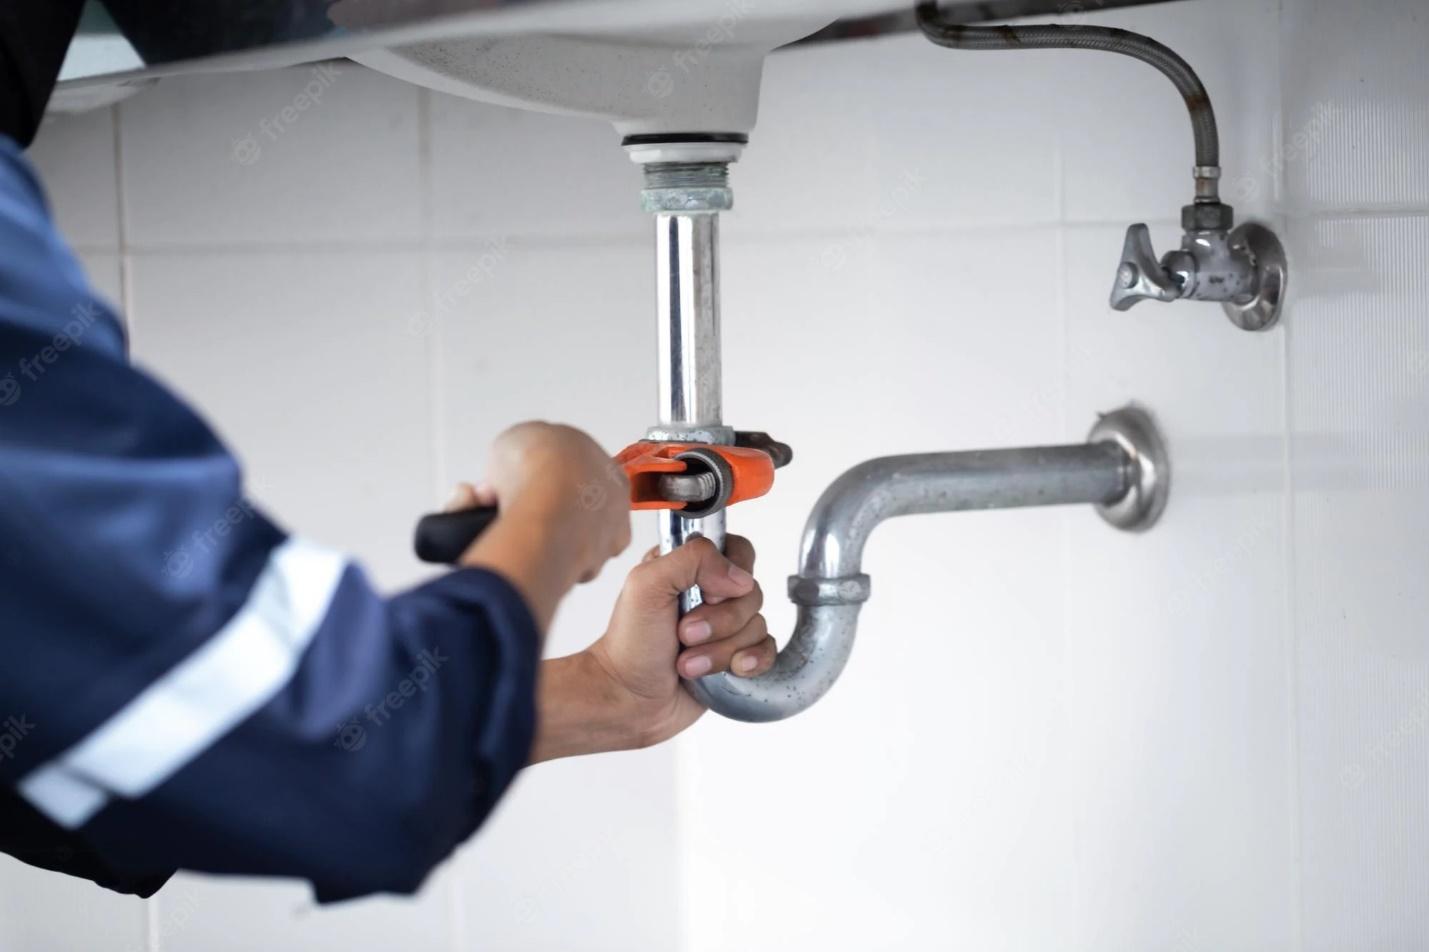 How to Find the Right Professional Plumber for Your Home